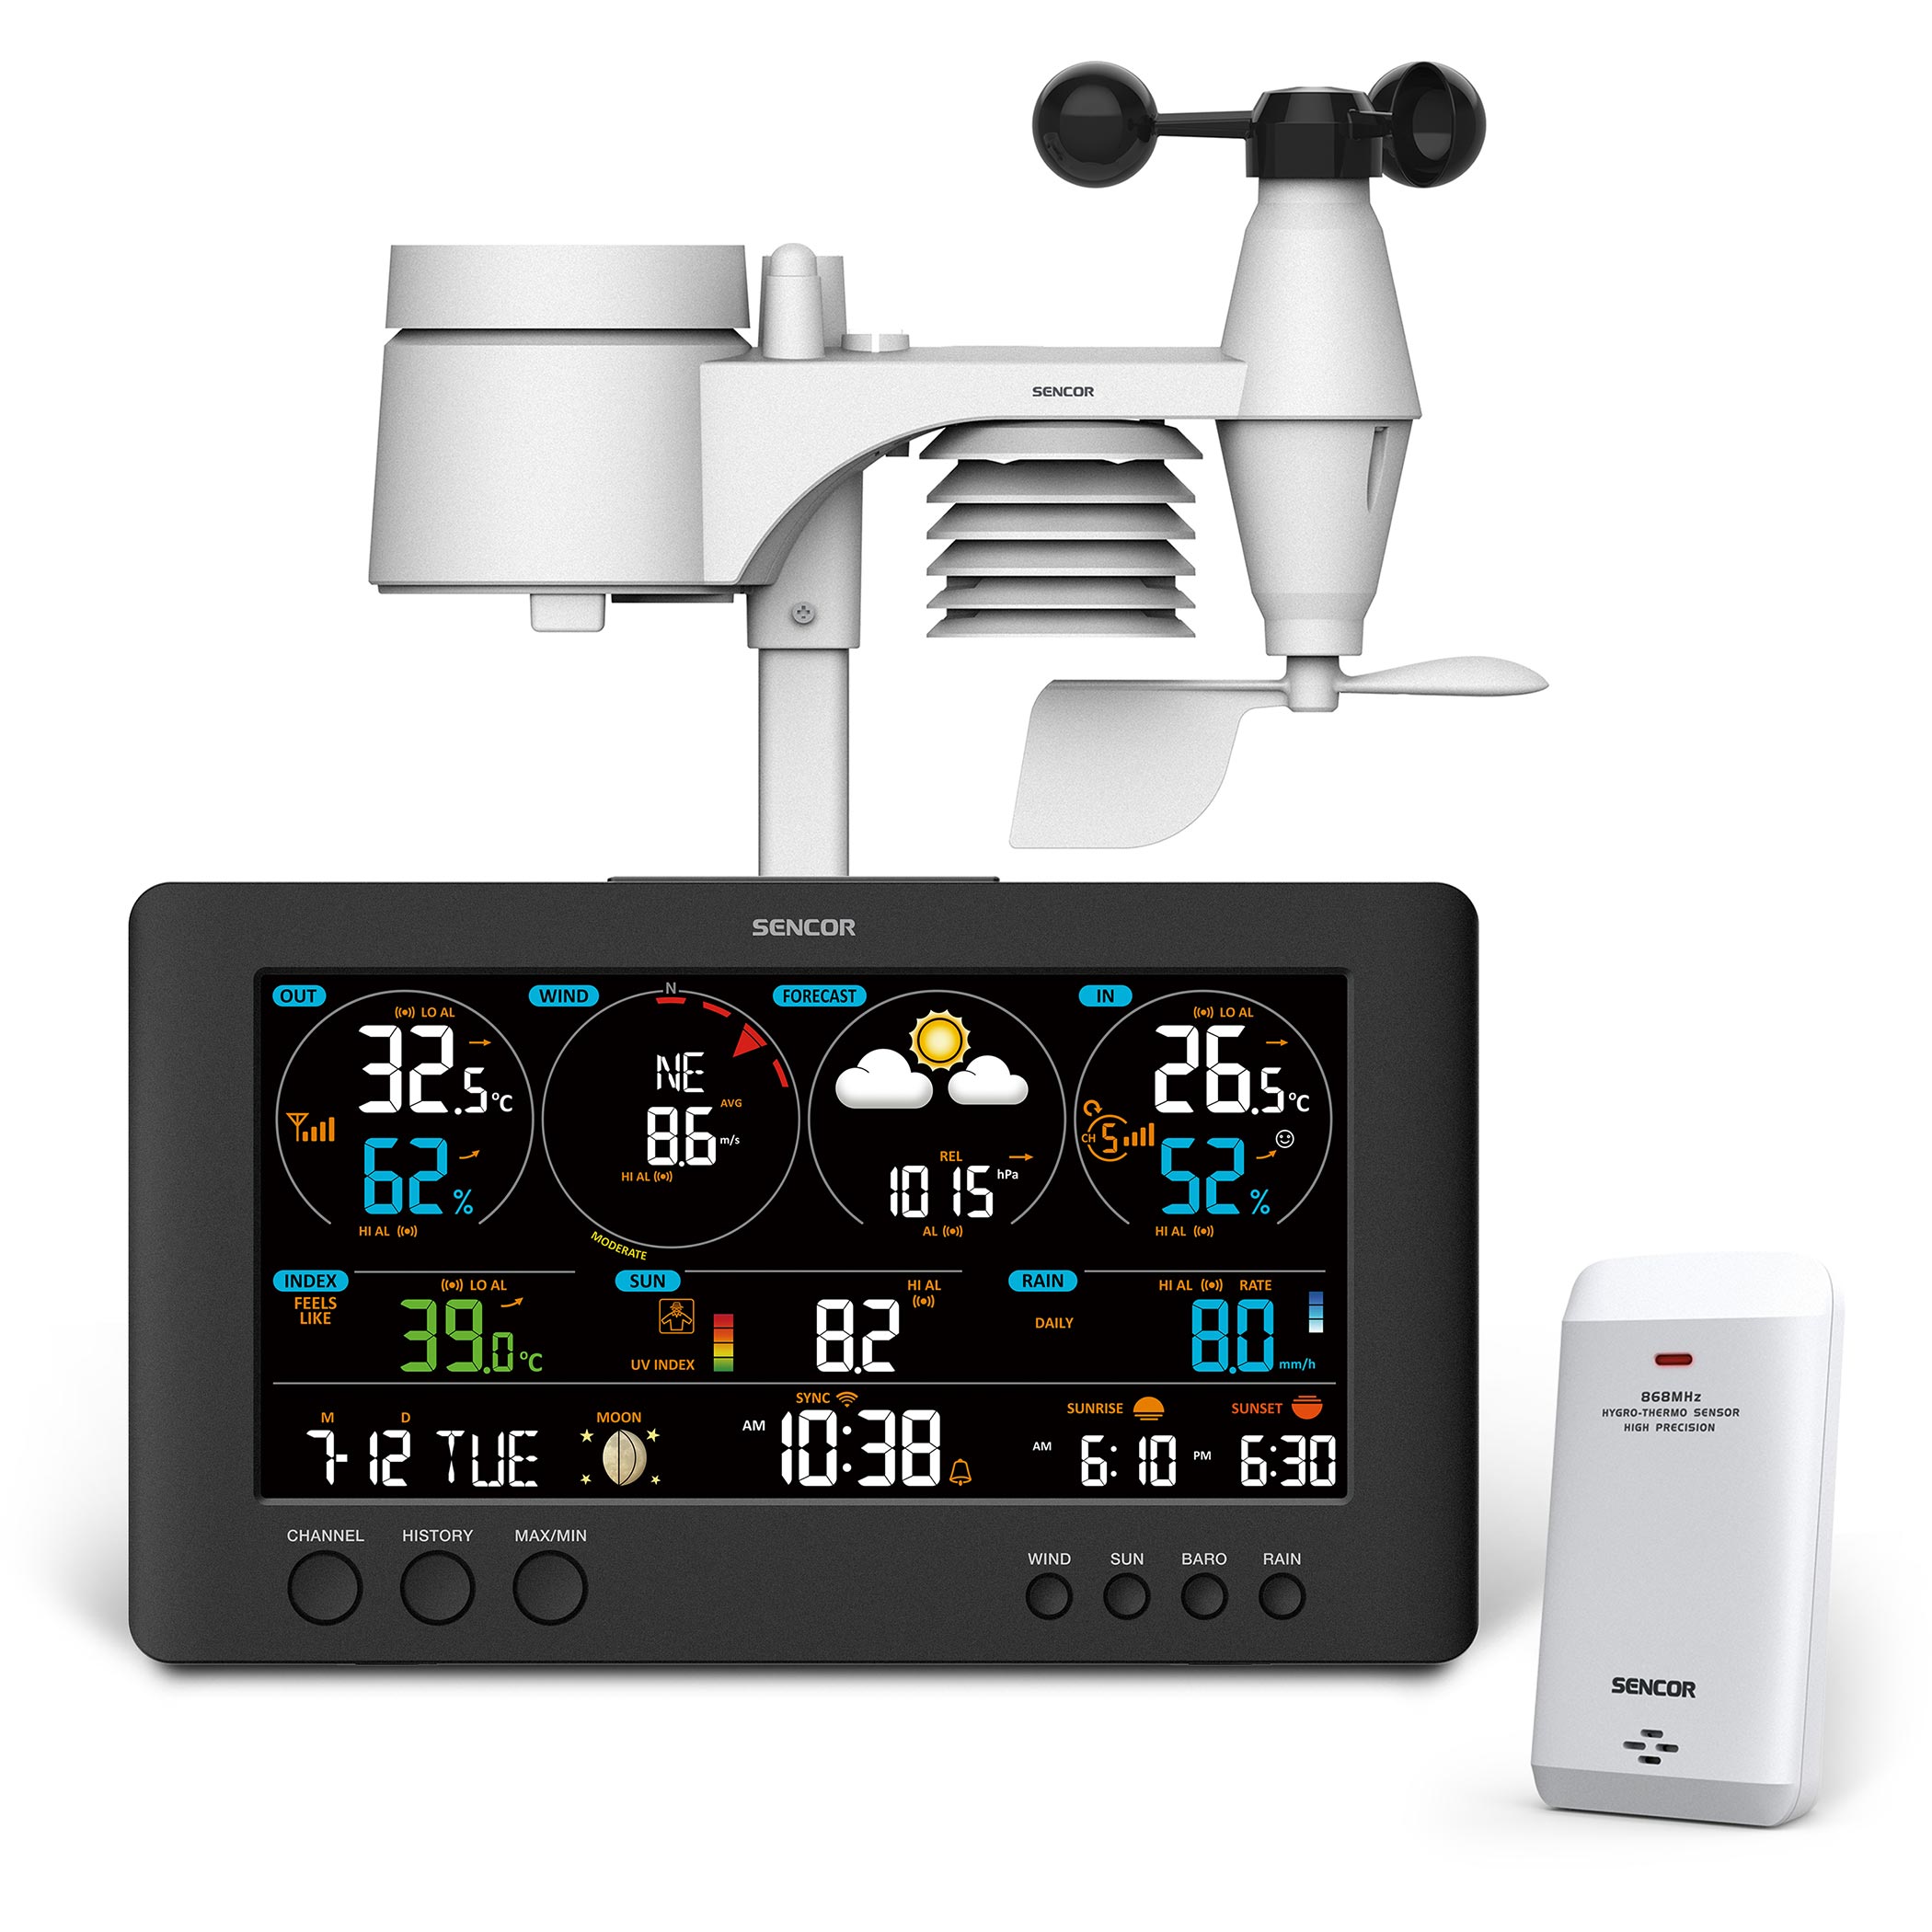 7in1 Wifi Weather Station Wireless LCD Color Display Thermometer